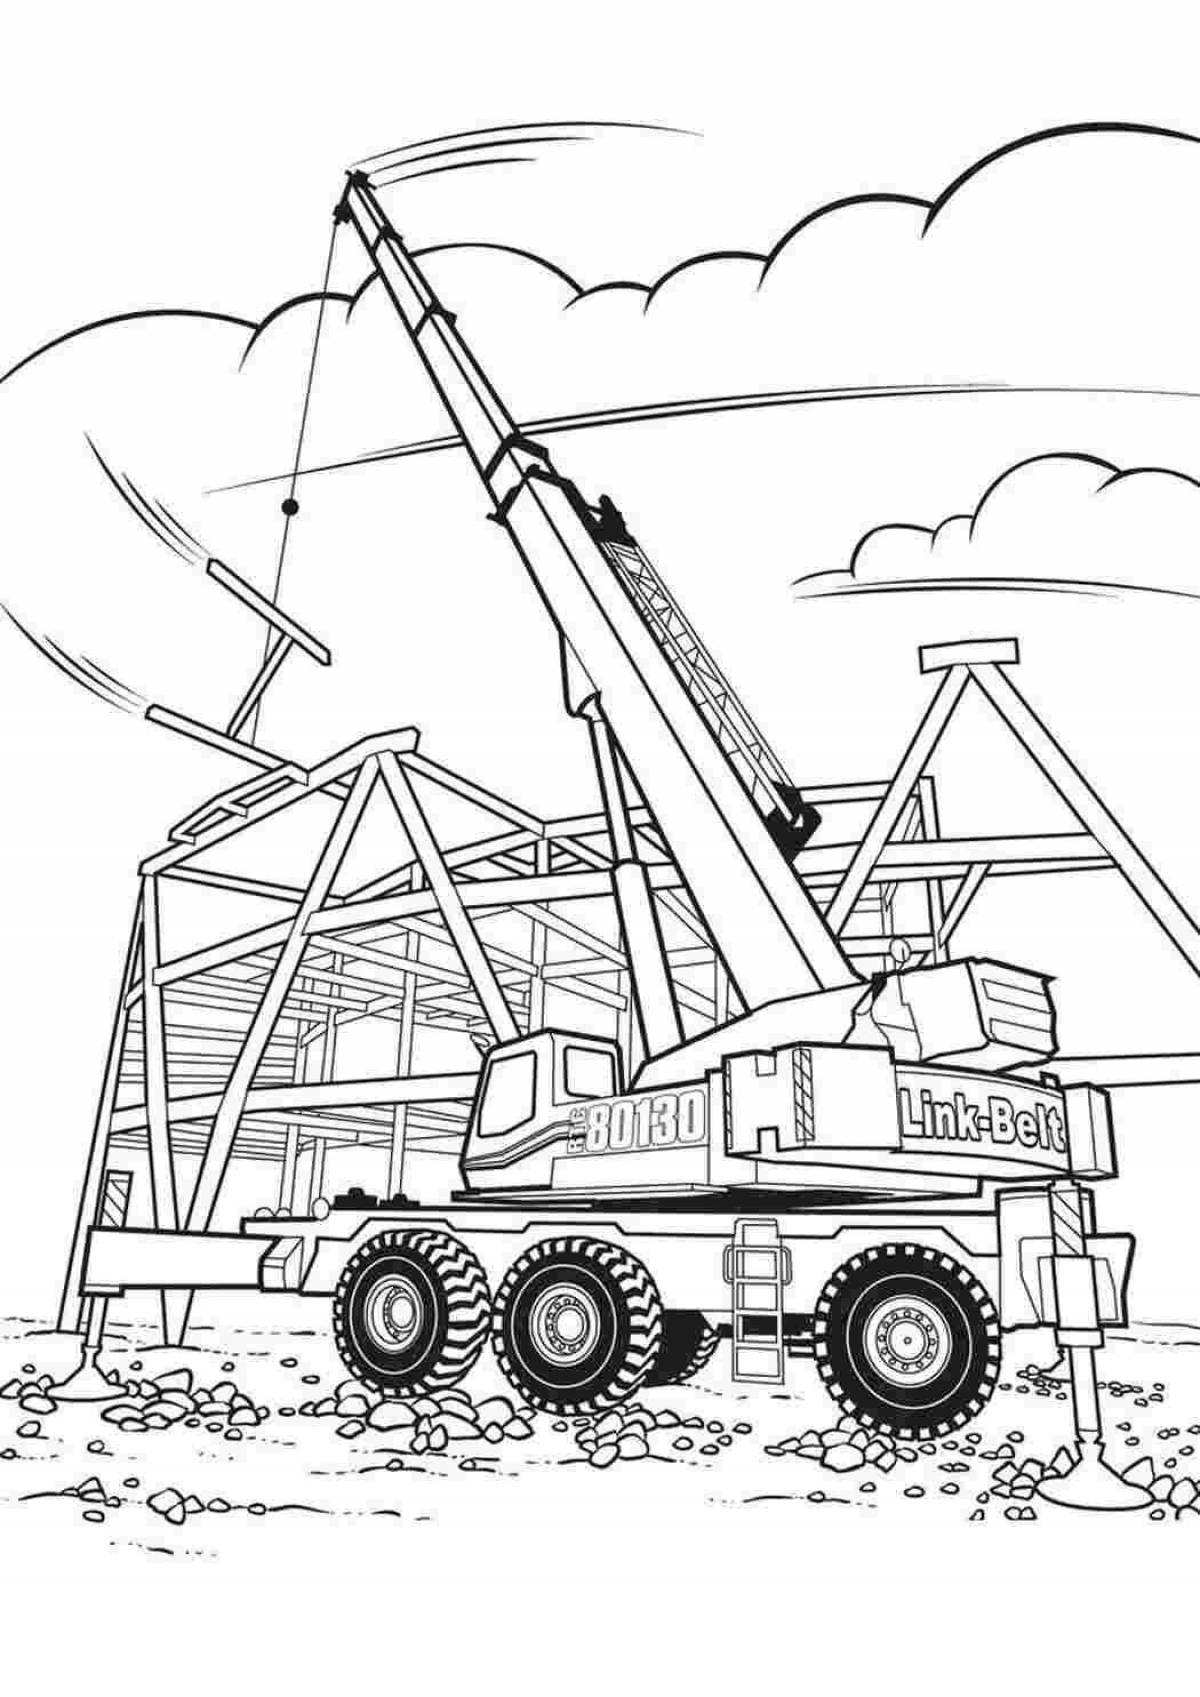 Student coloring page of truck crane